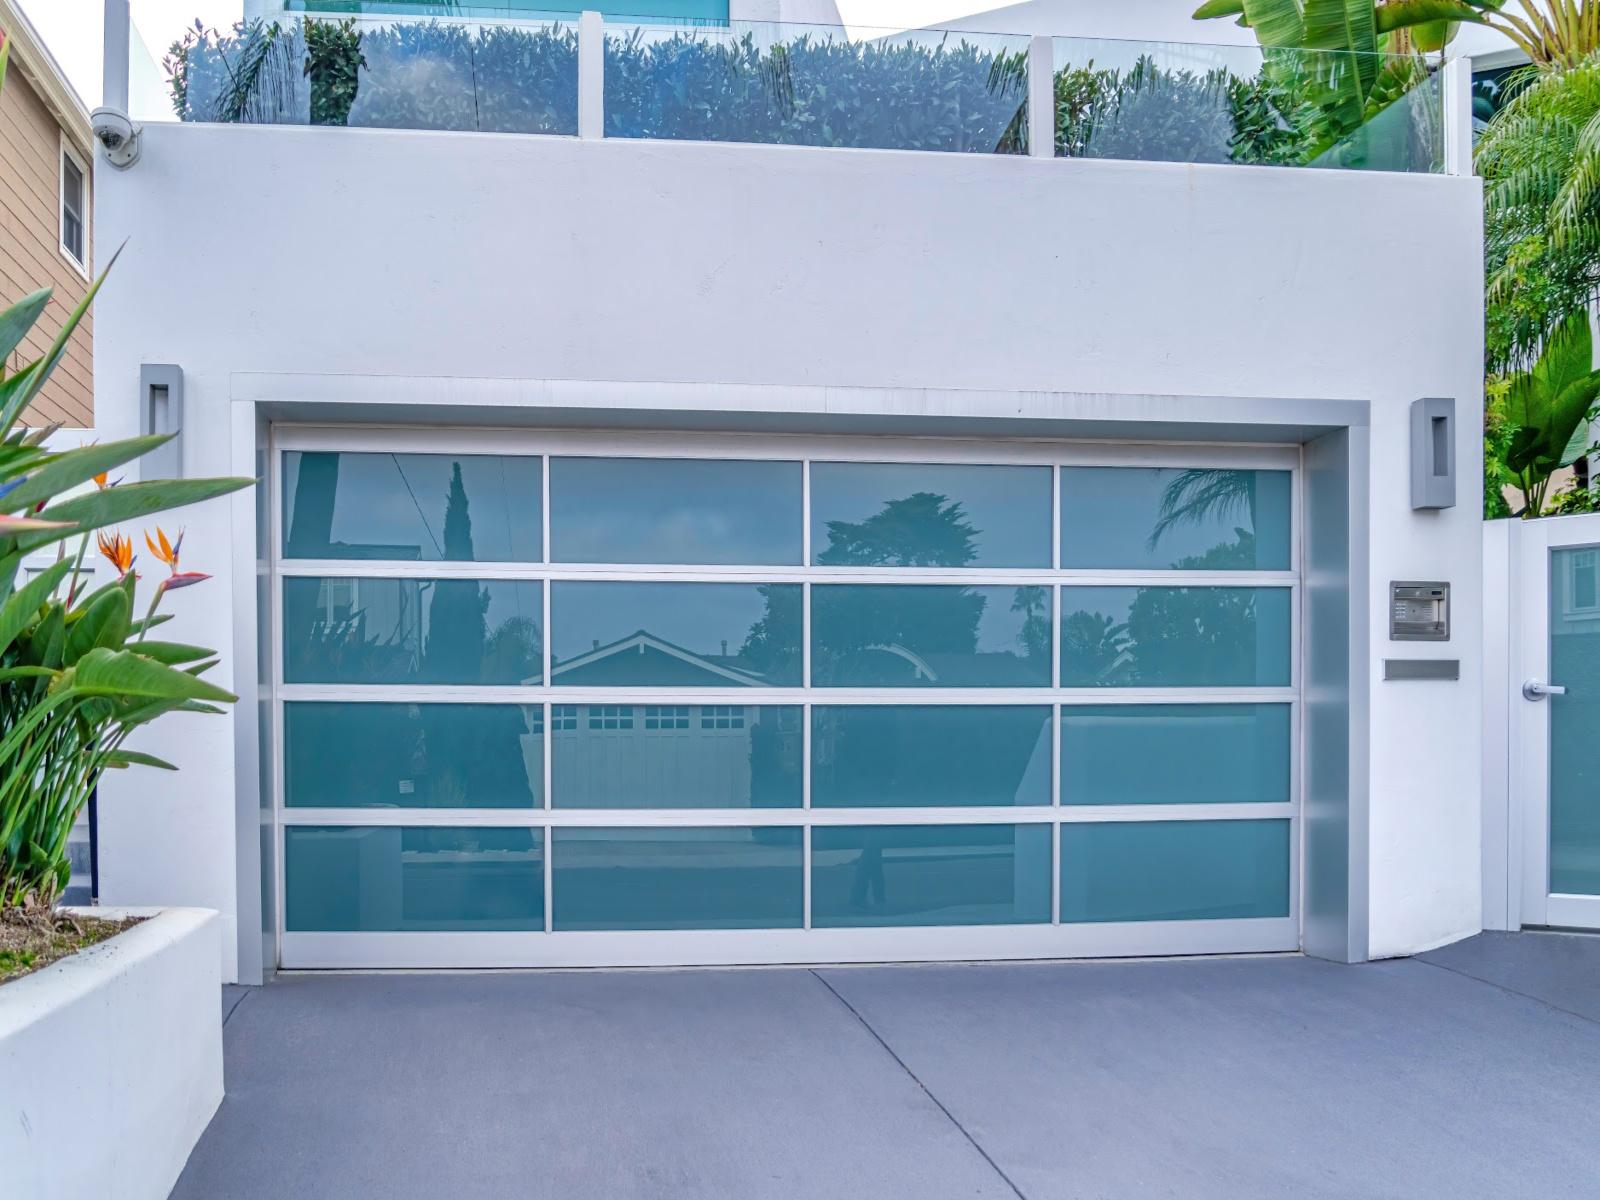 Benefits To Adding A Garage On To Your Home